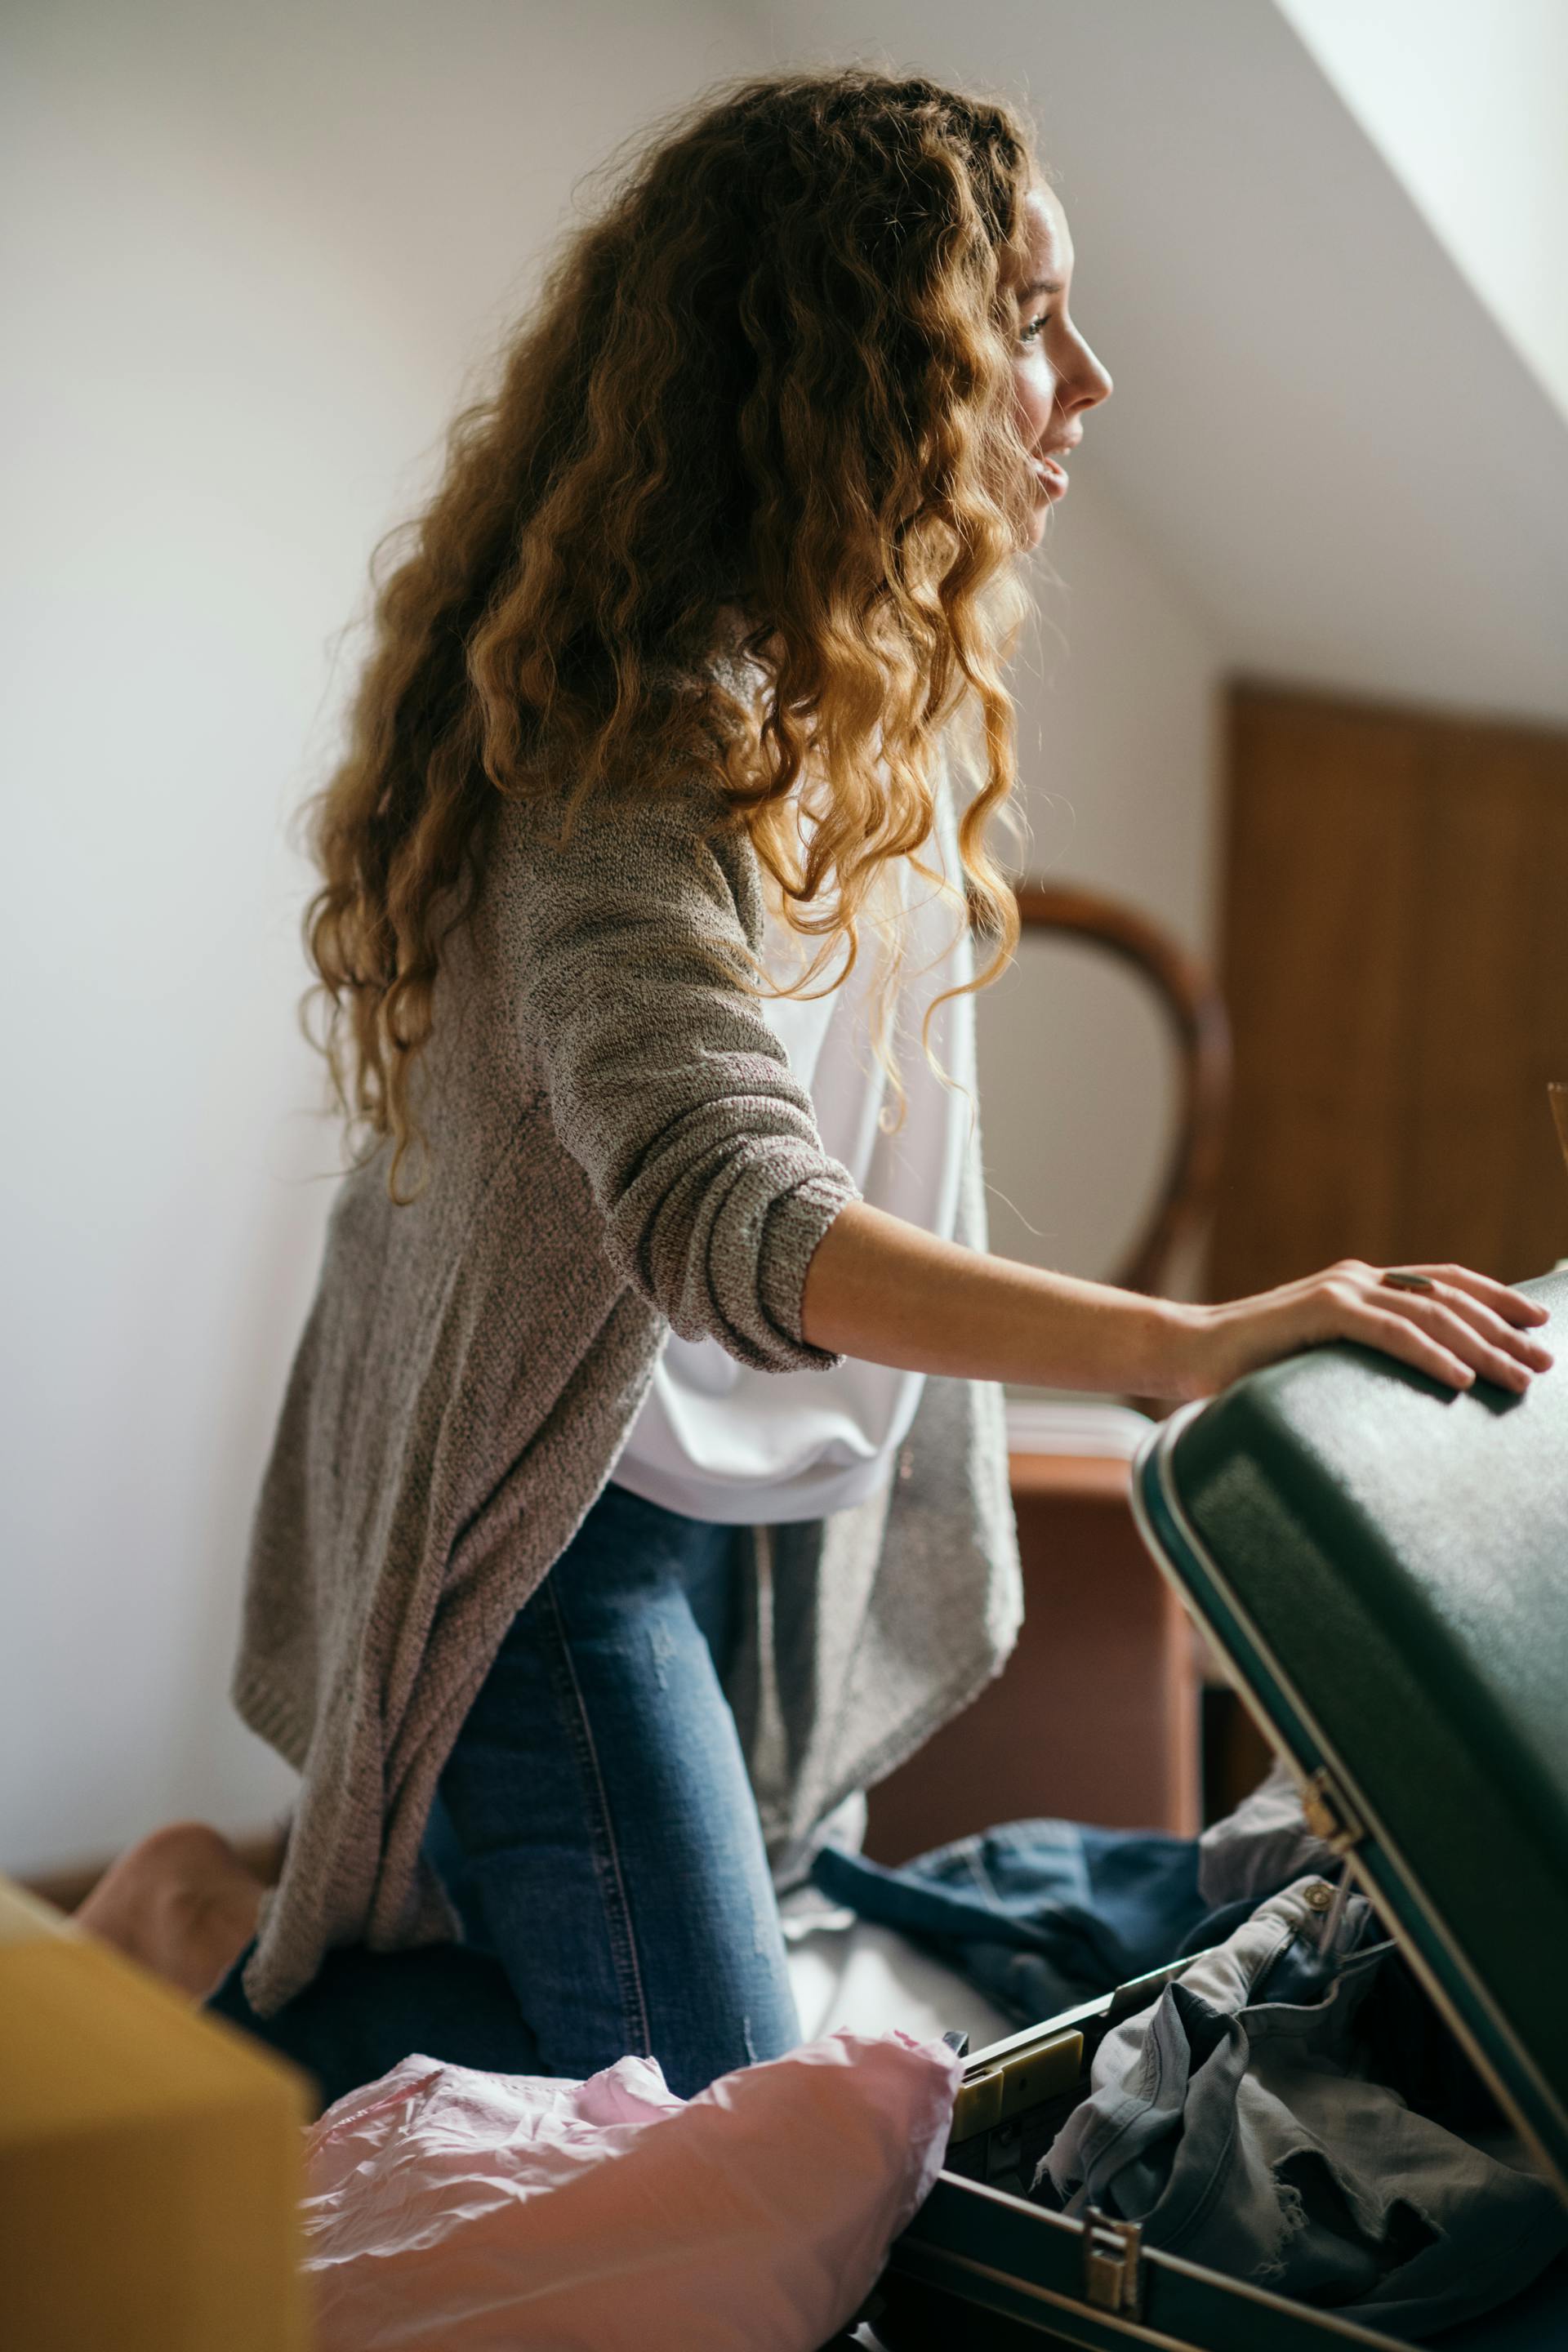 A young woman packing her suitcase | Source: Pexels